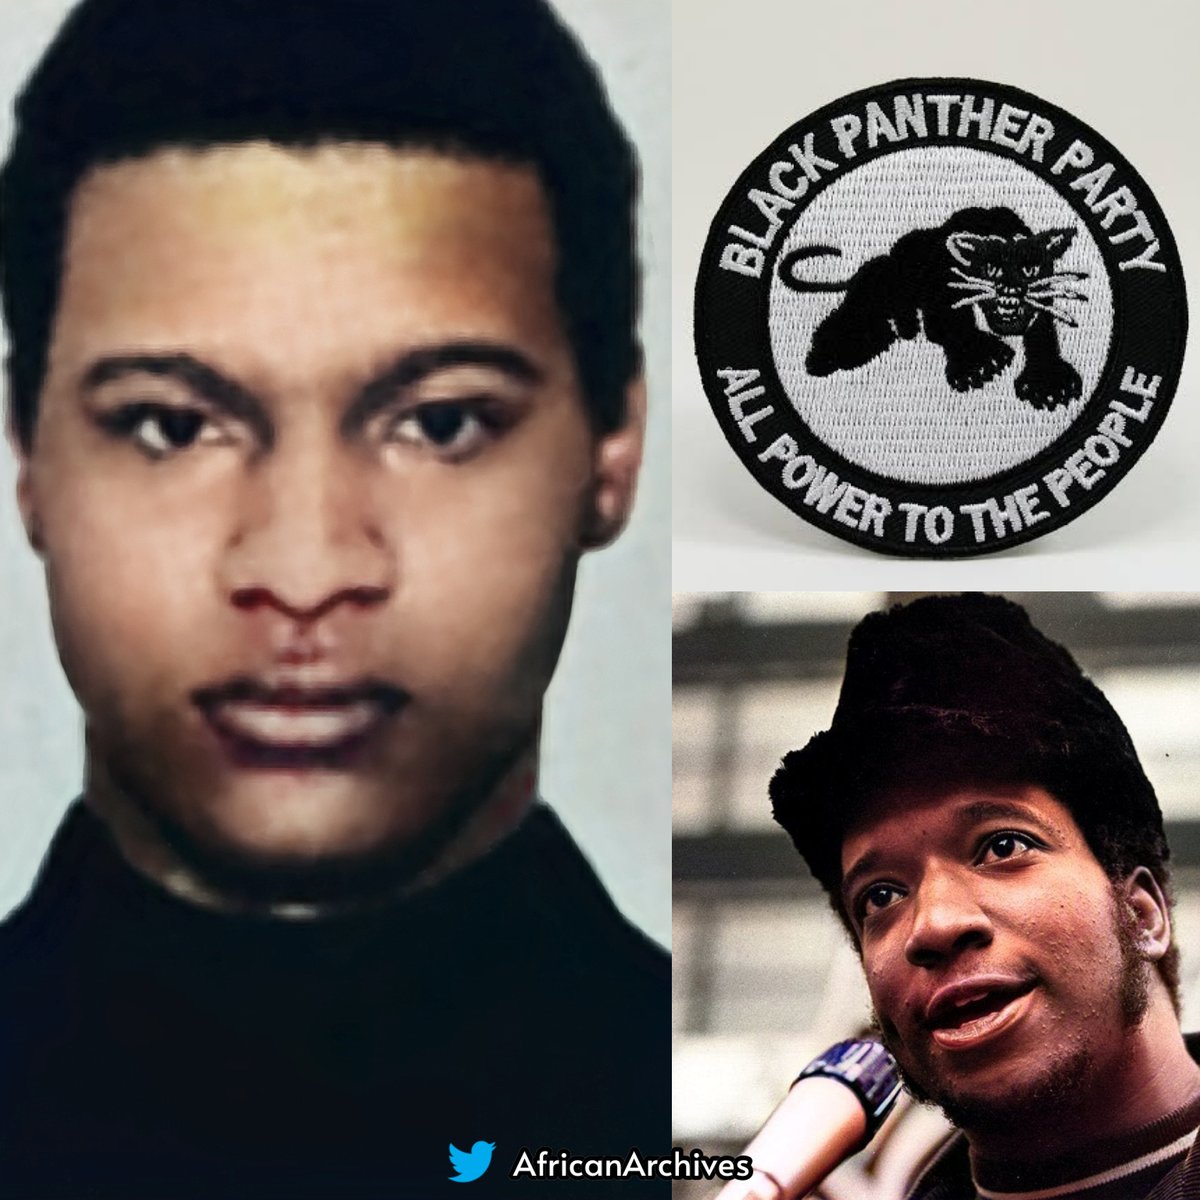 On this day in 1947, Activist & member of the Black Panther Party Mark Clark was born. He was assassinated together with Fred Hampton by Chicago police & FBI, both at 21 years Old. William O'Neal, an FBI informant, infiltrated the Panthers & set up them up for $300 A THREAD